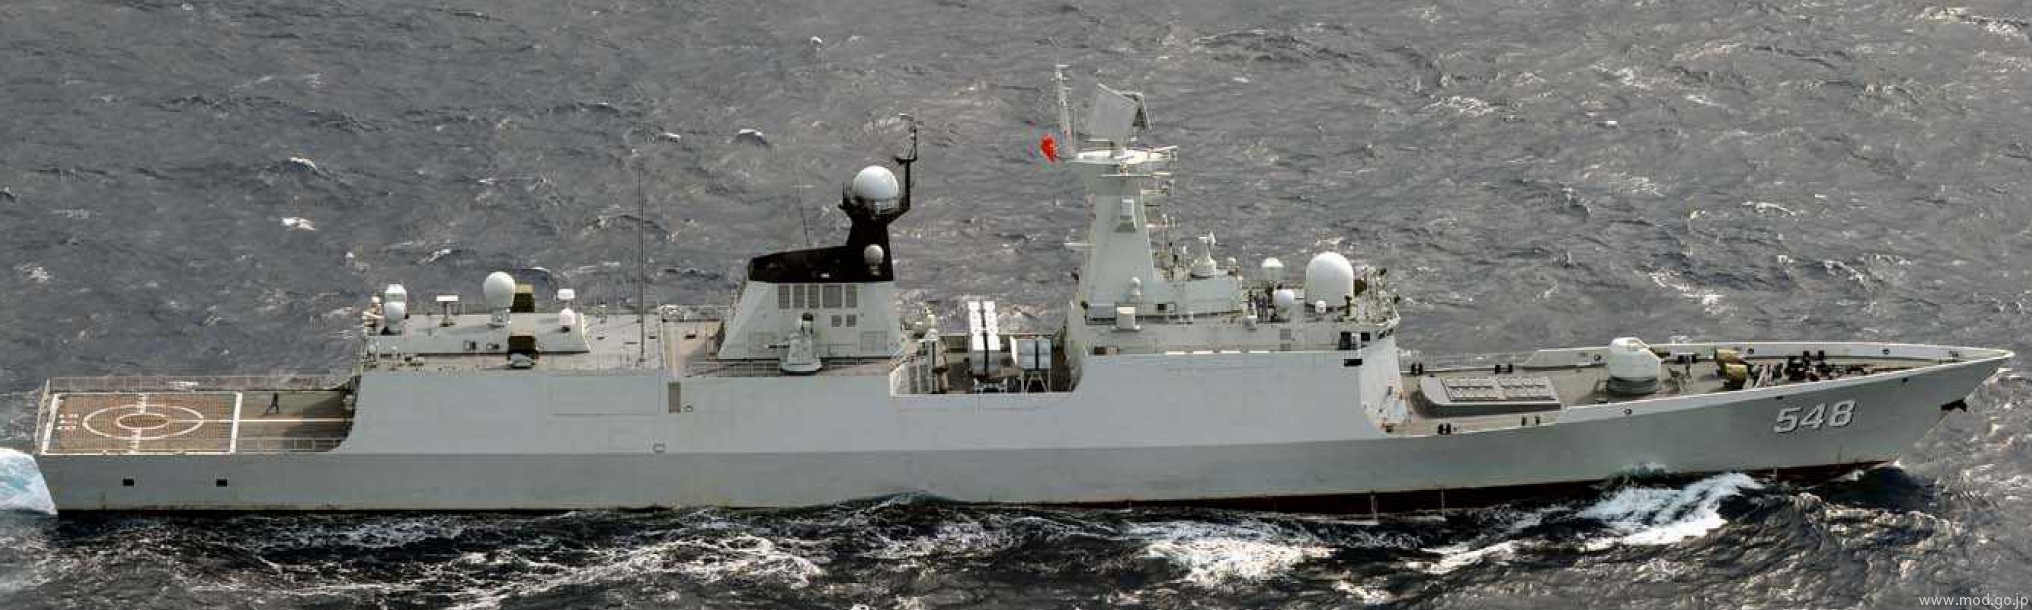 ffg-548 plans yiyang type 054a jiangkai ii class guided missile frigate china people's liberation army navy 05